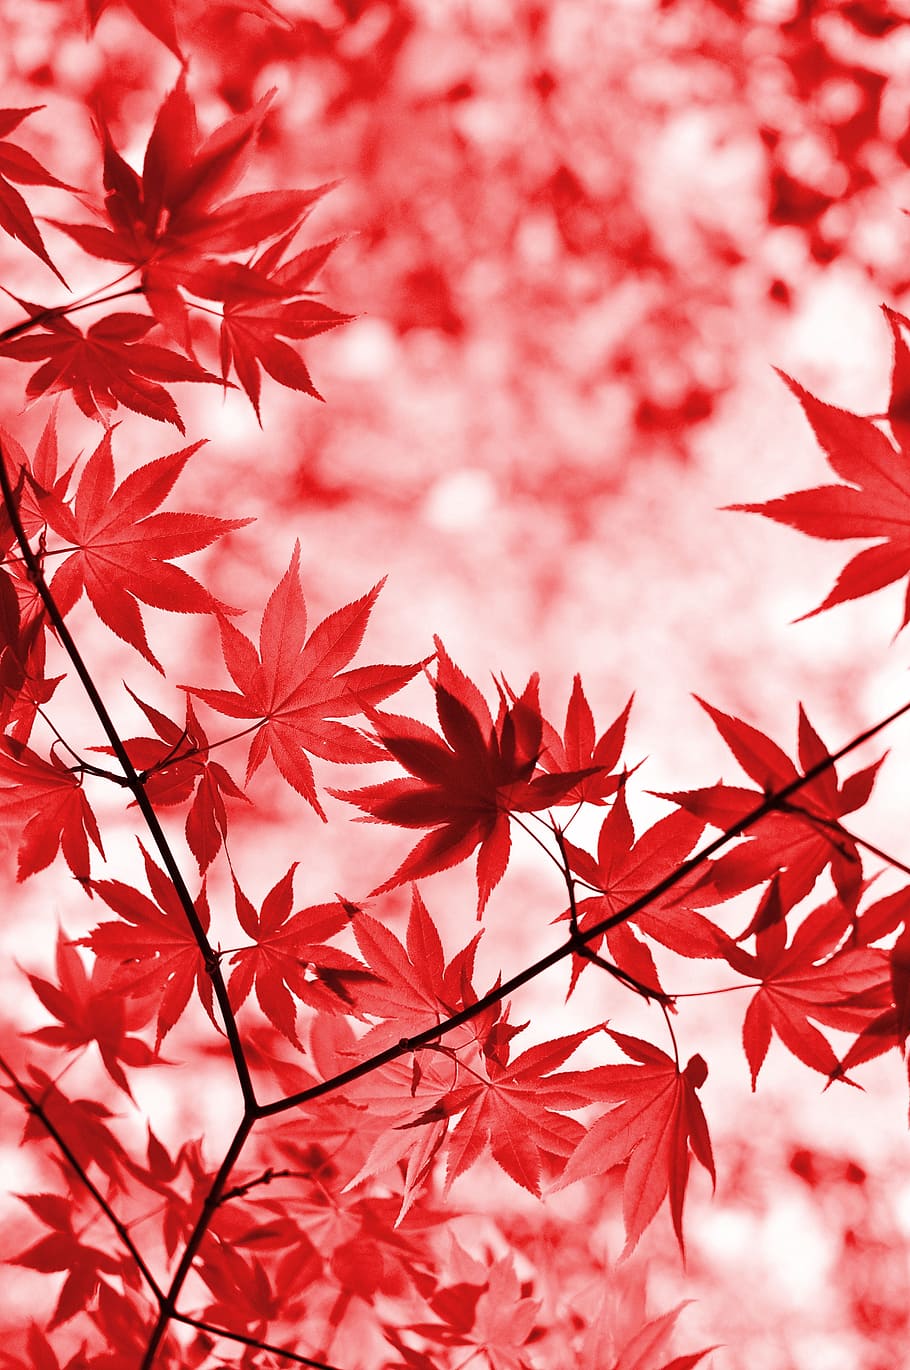 red maple leaves, maple, red, leaves, tree, foliage, japanese maple, leaf, branches, plant